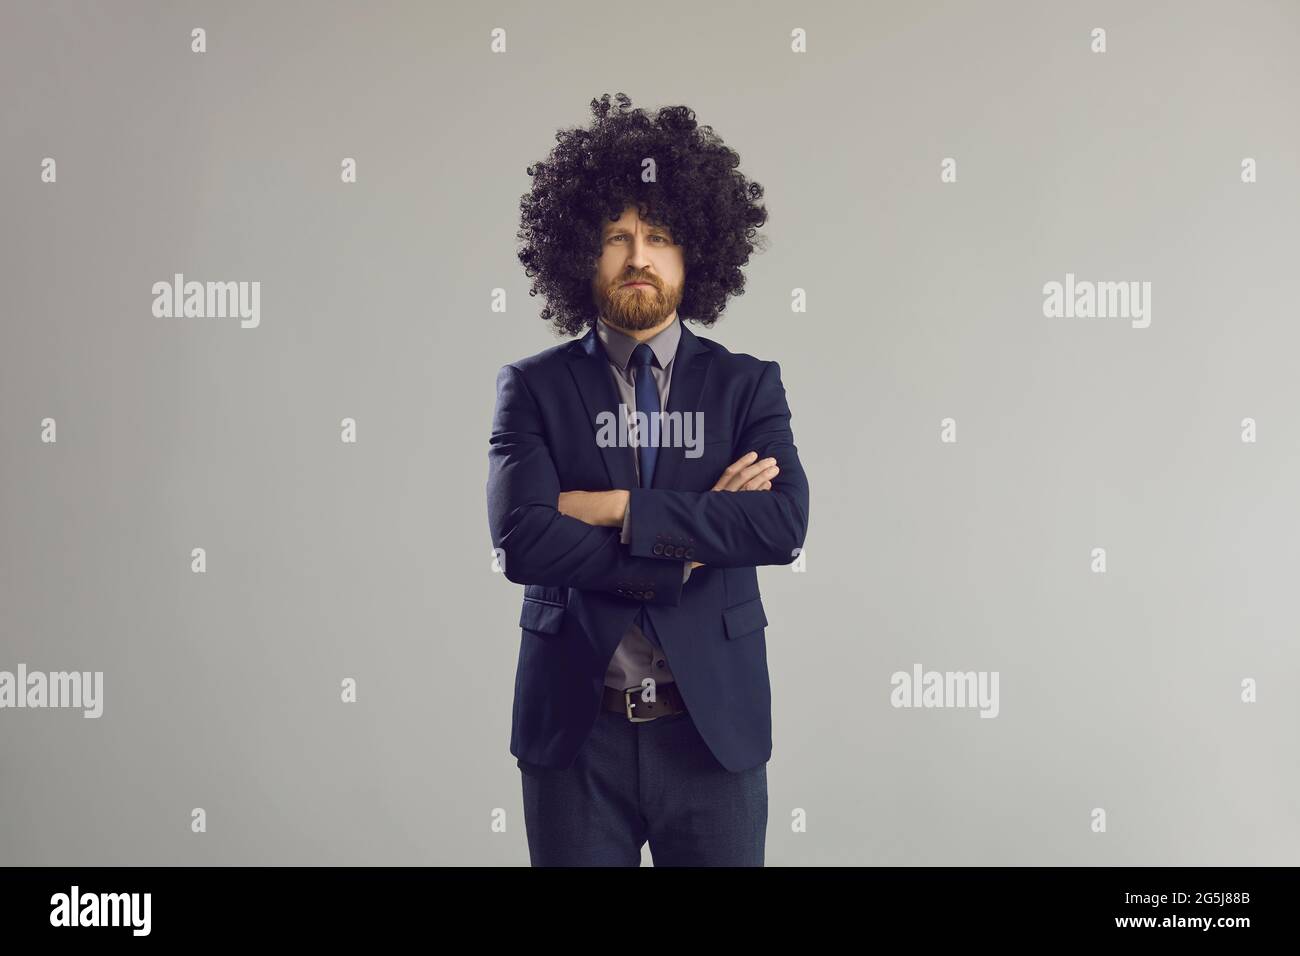 Serious business man in stylish curly hair wig standing with arms crossed Stock Photo